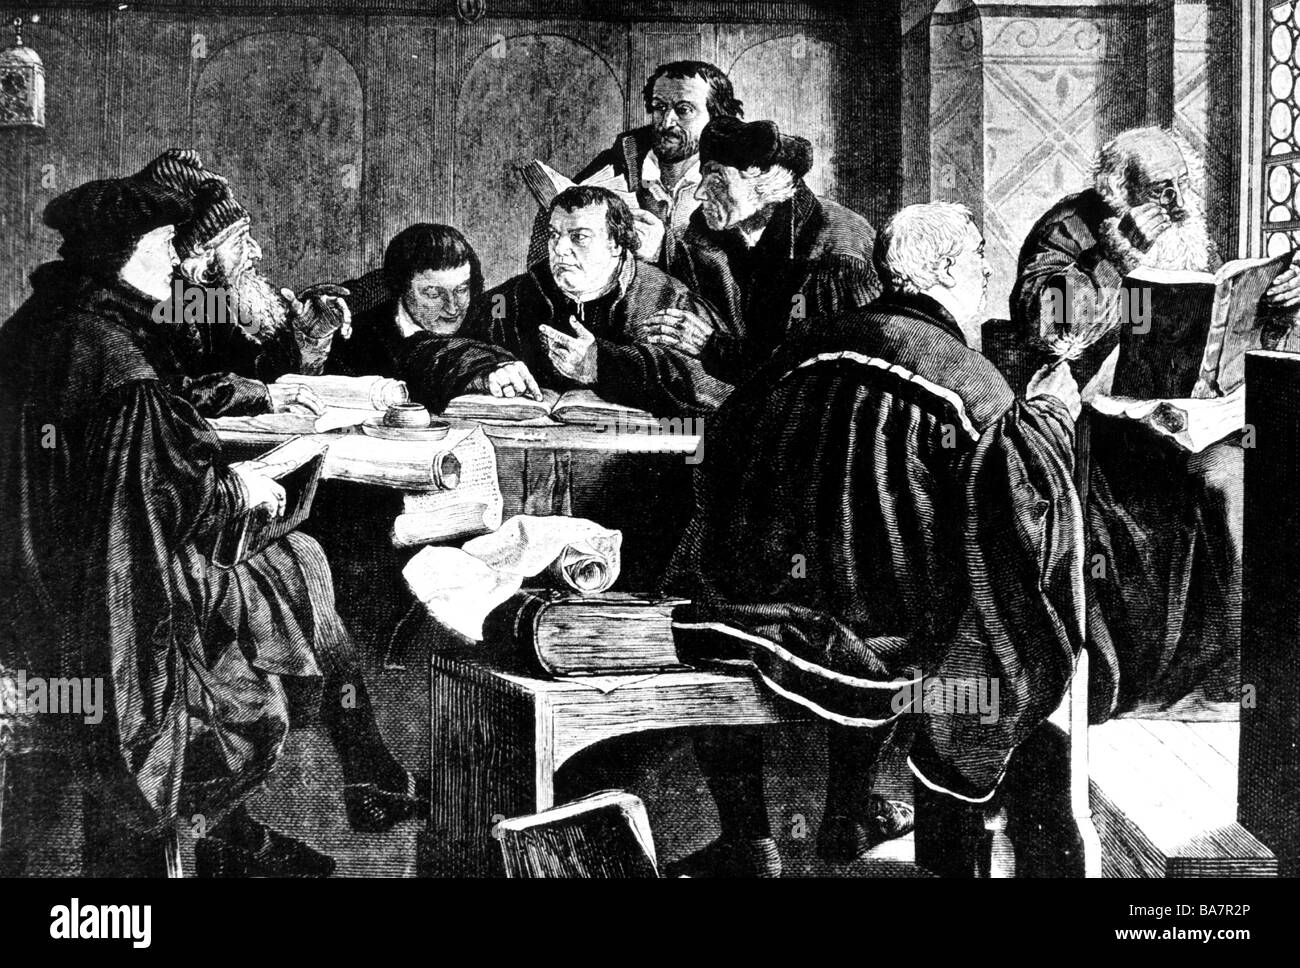 Luther, Martin, 10.11.1483 - 18.2.1546, German theologian, ecclesiastical reformer, translating the bible, Wartburg, Germany, from left to right: Jonas, rabbi,  Bugenhagen, Luther, Melanchthon, Artist's Copyright has not to be cleared Stock Photo